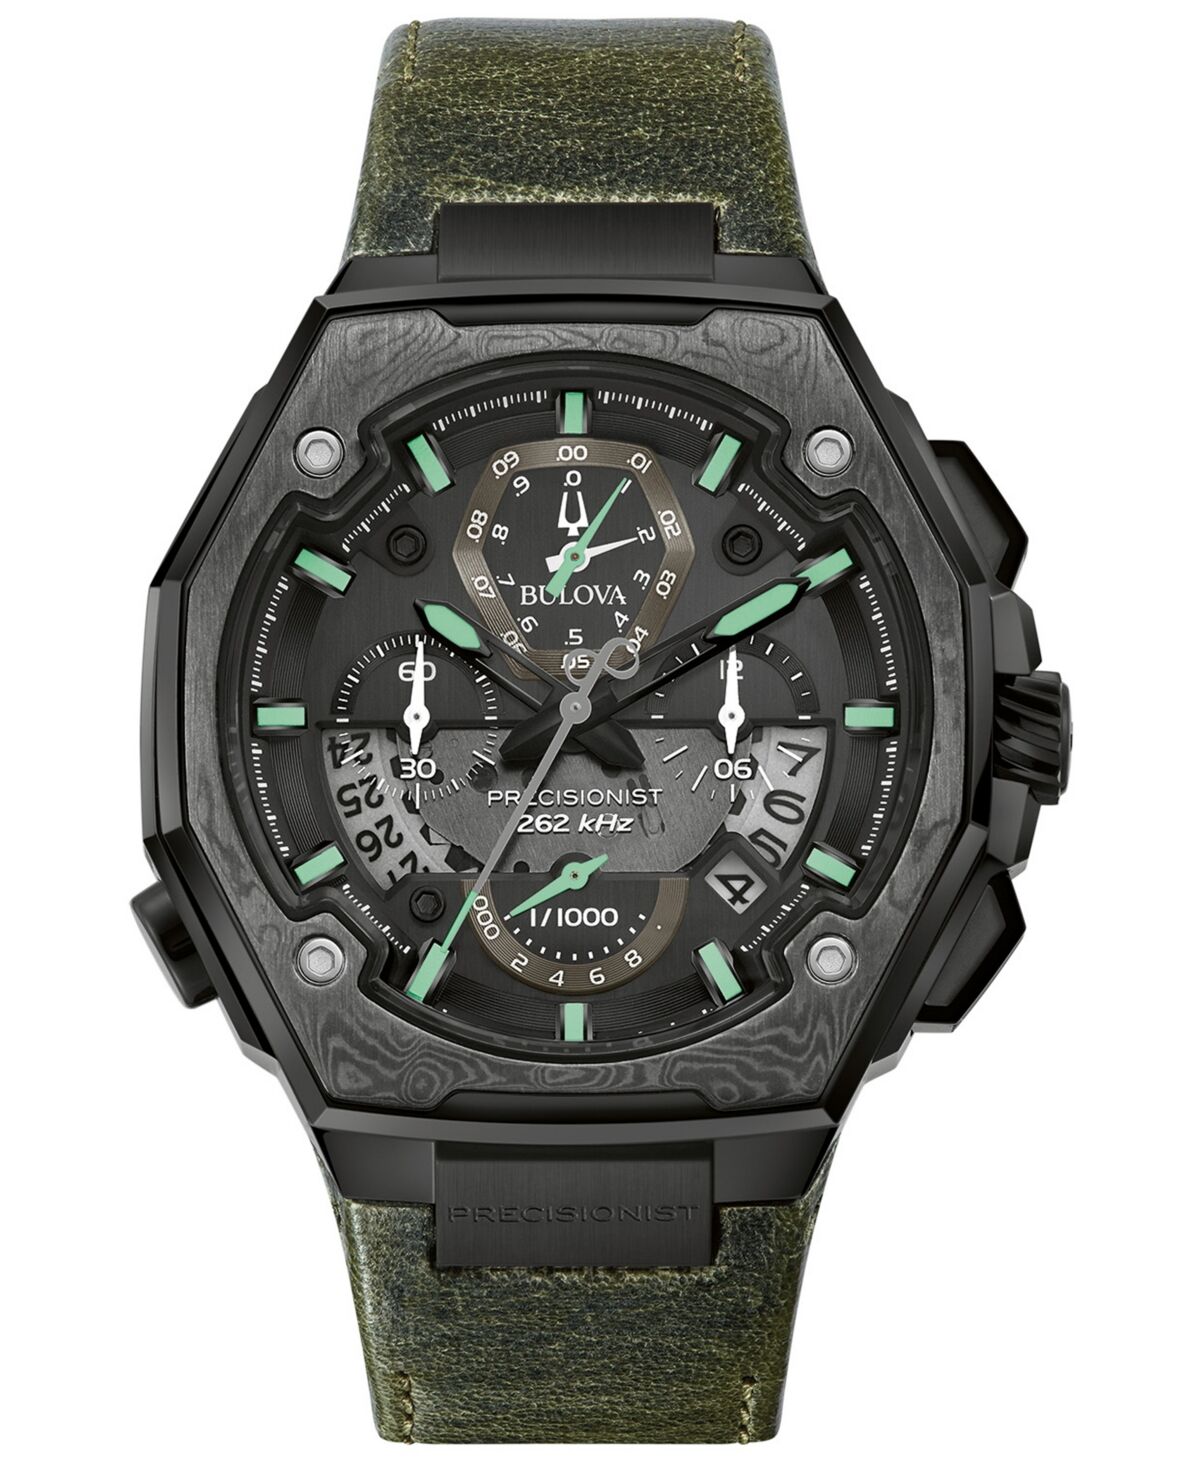 Bulova Men's Precisionist Chronograph Green Leather Strap Watch 44.7x46.8mm, A Special Edition - Green